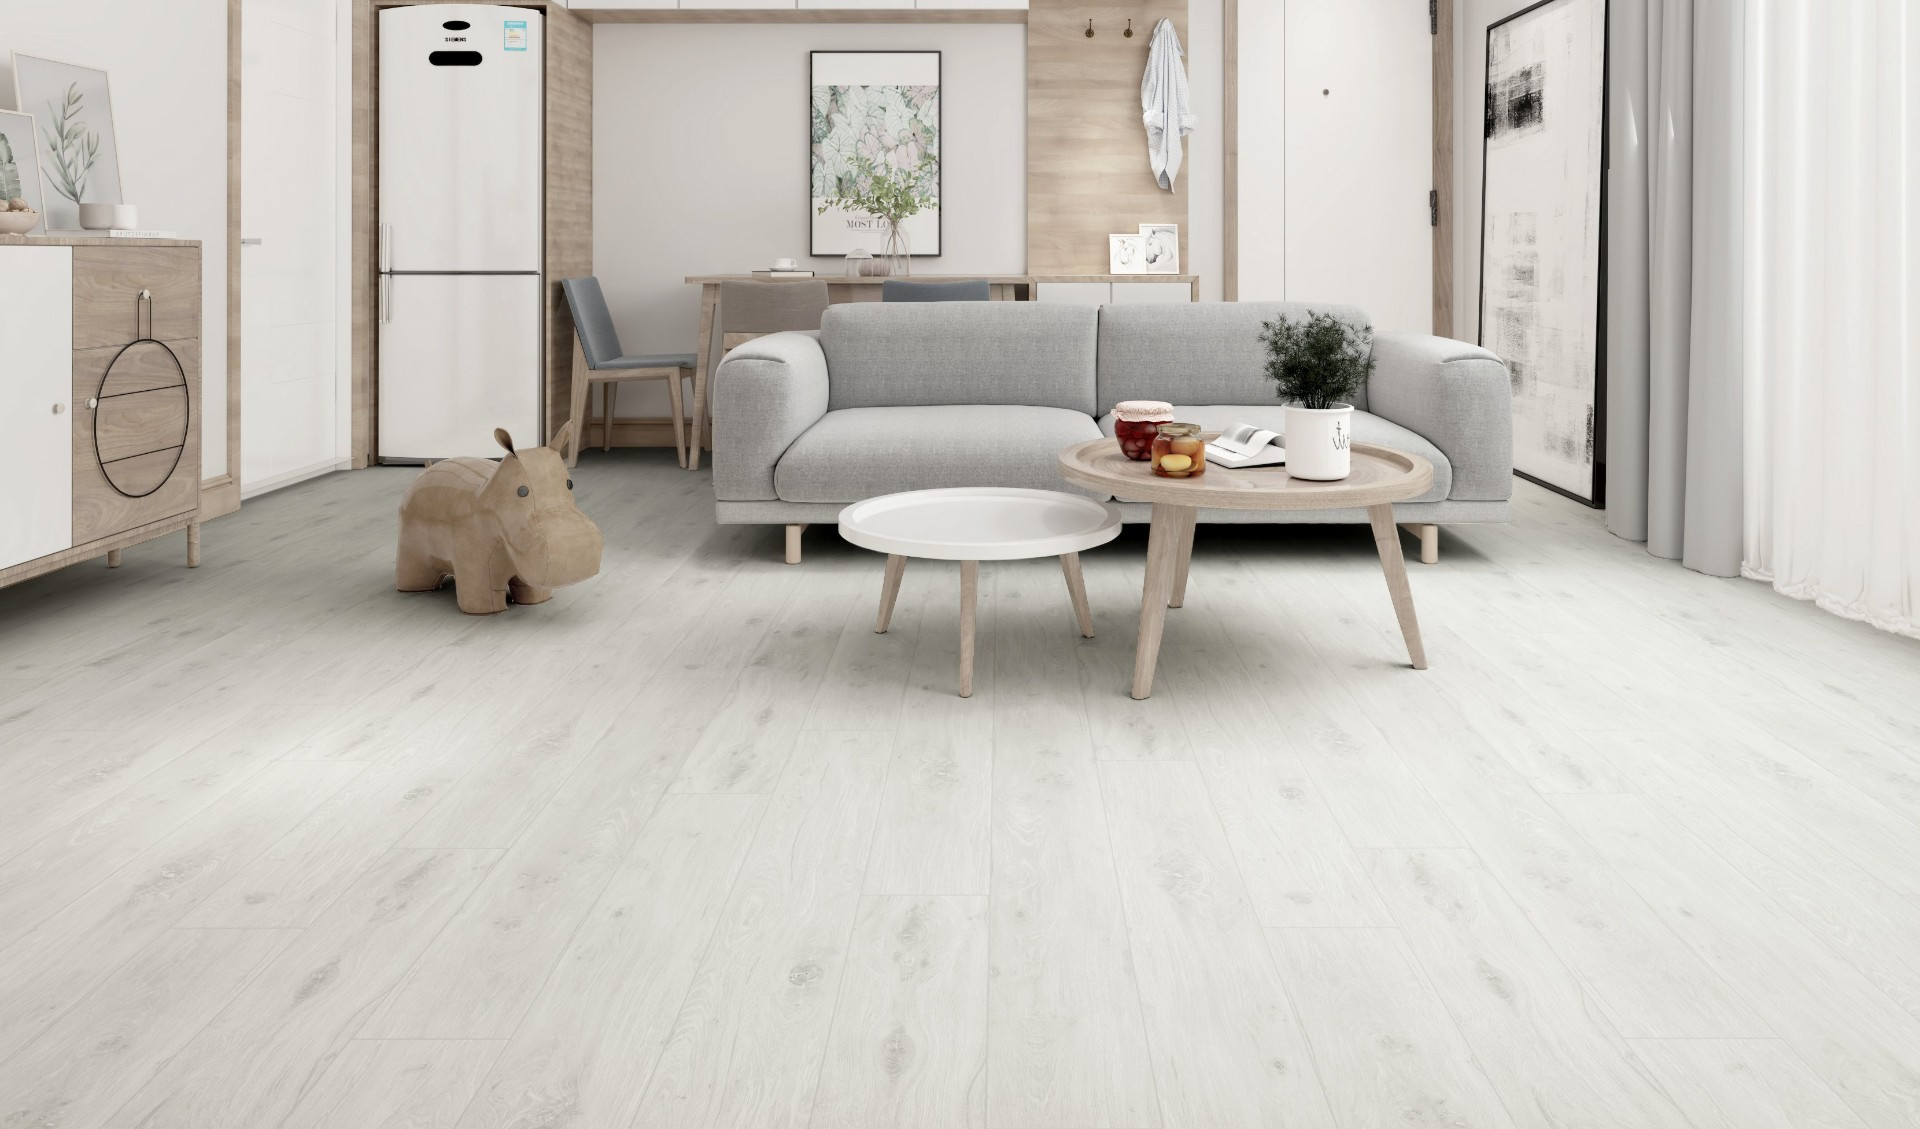 Deciding Between WPC and SPC Flooring for Your Space